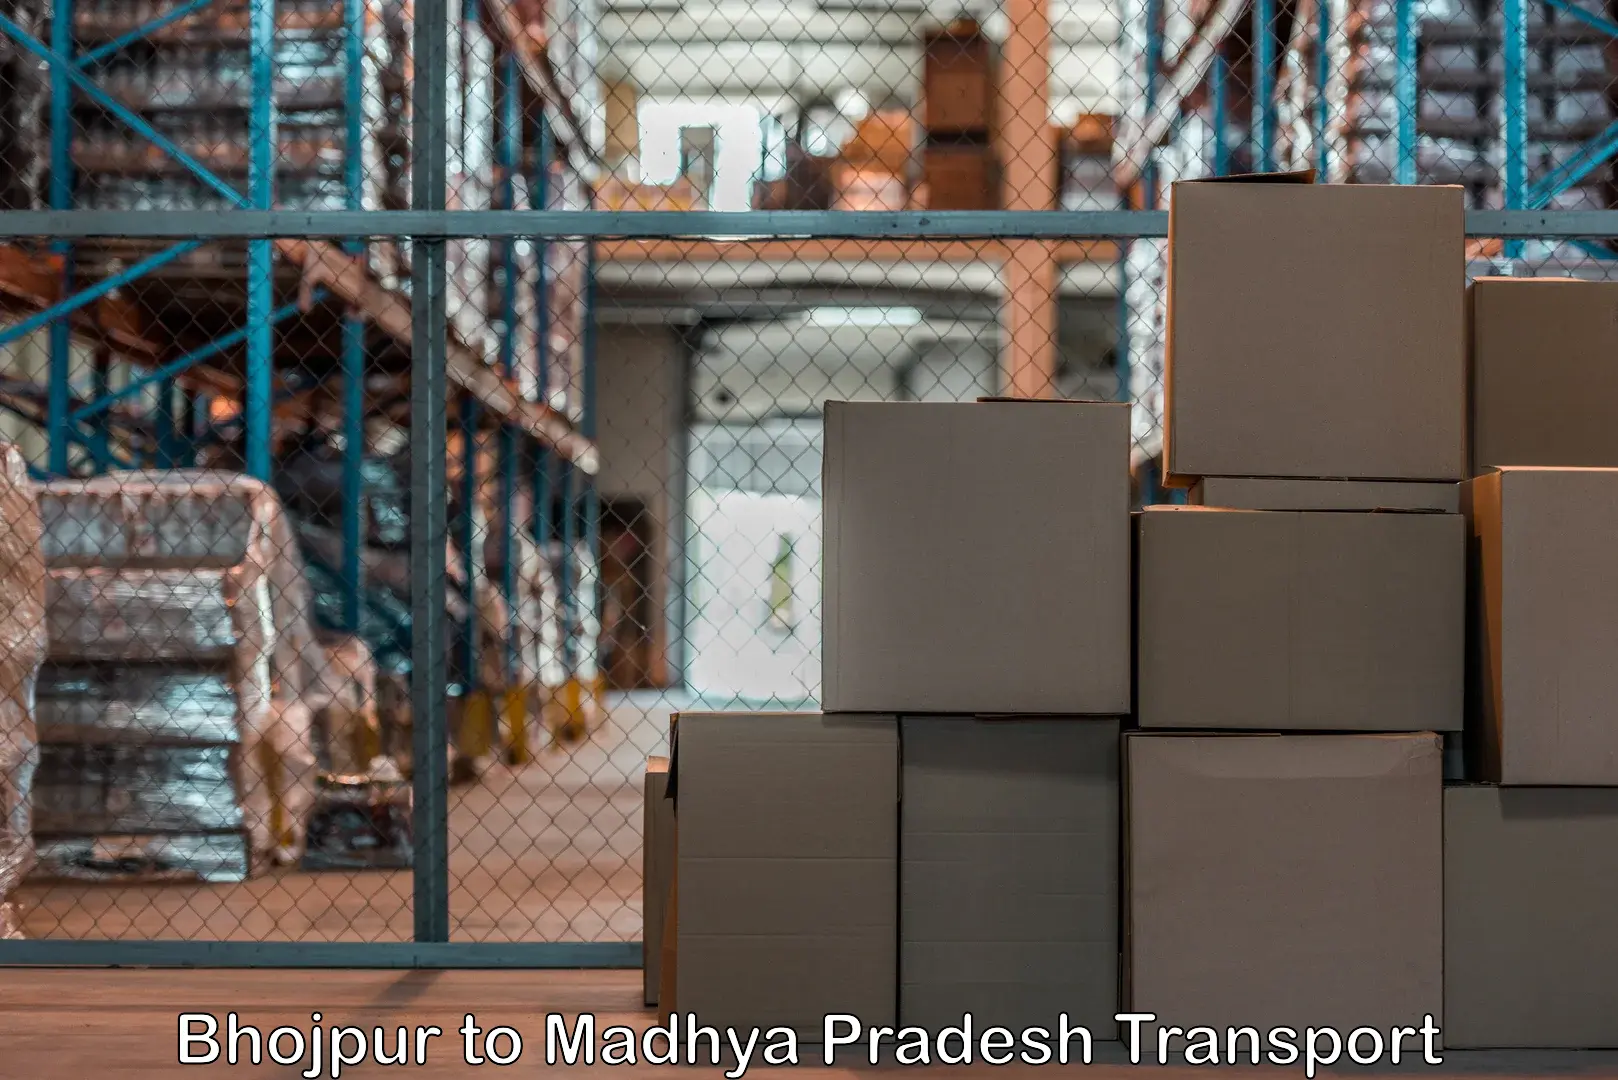 Truck transport companies in India Bhojpur to Dola